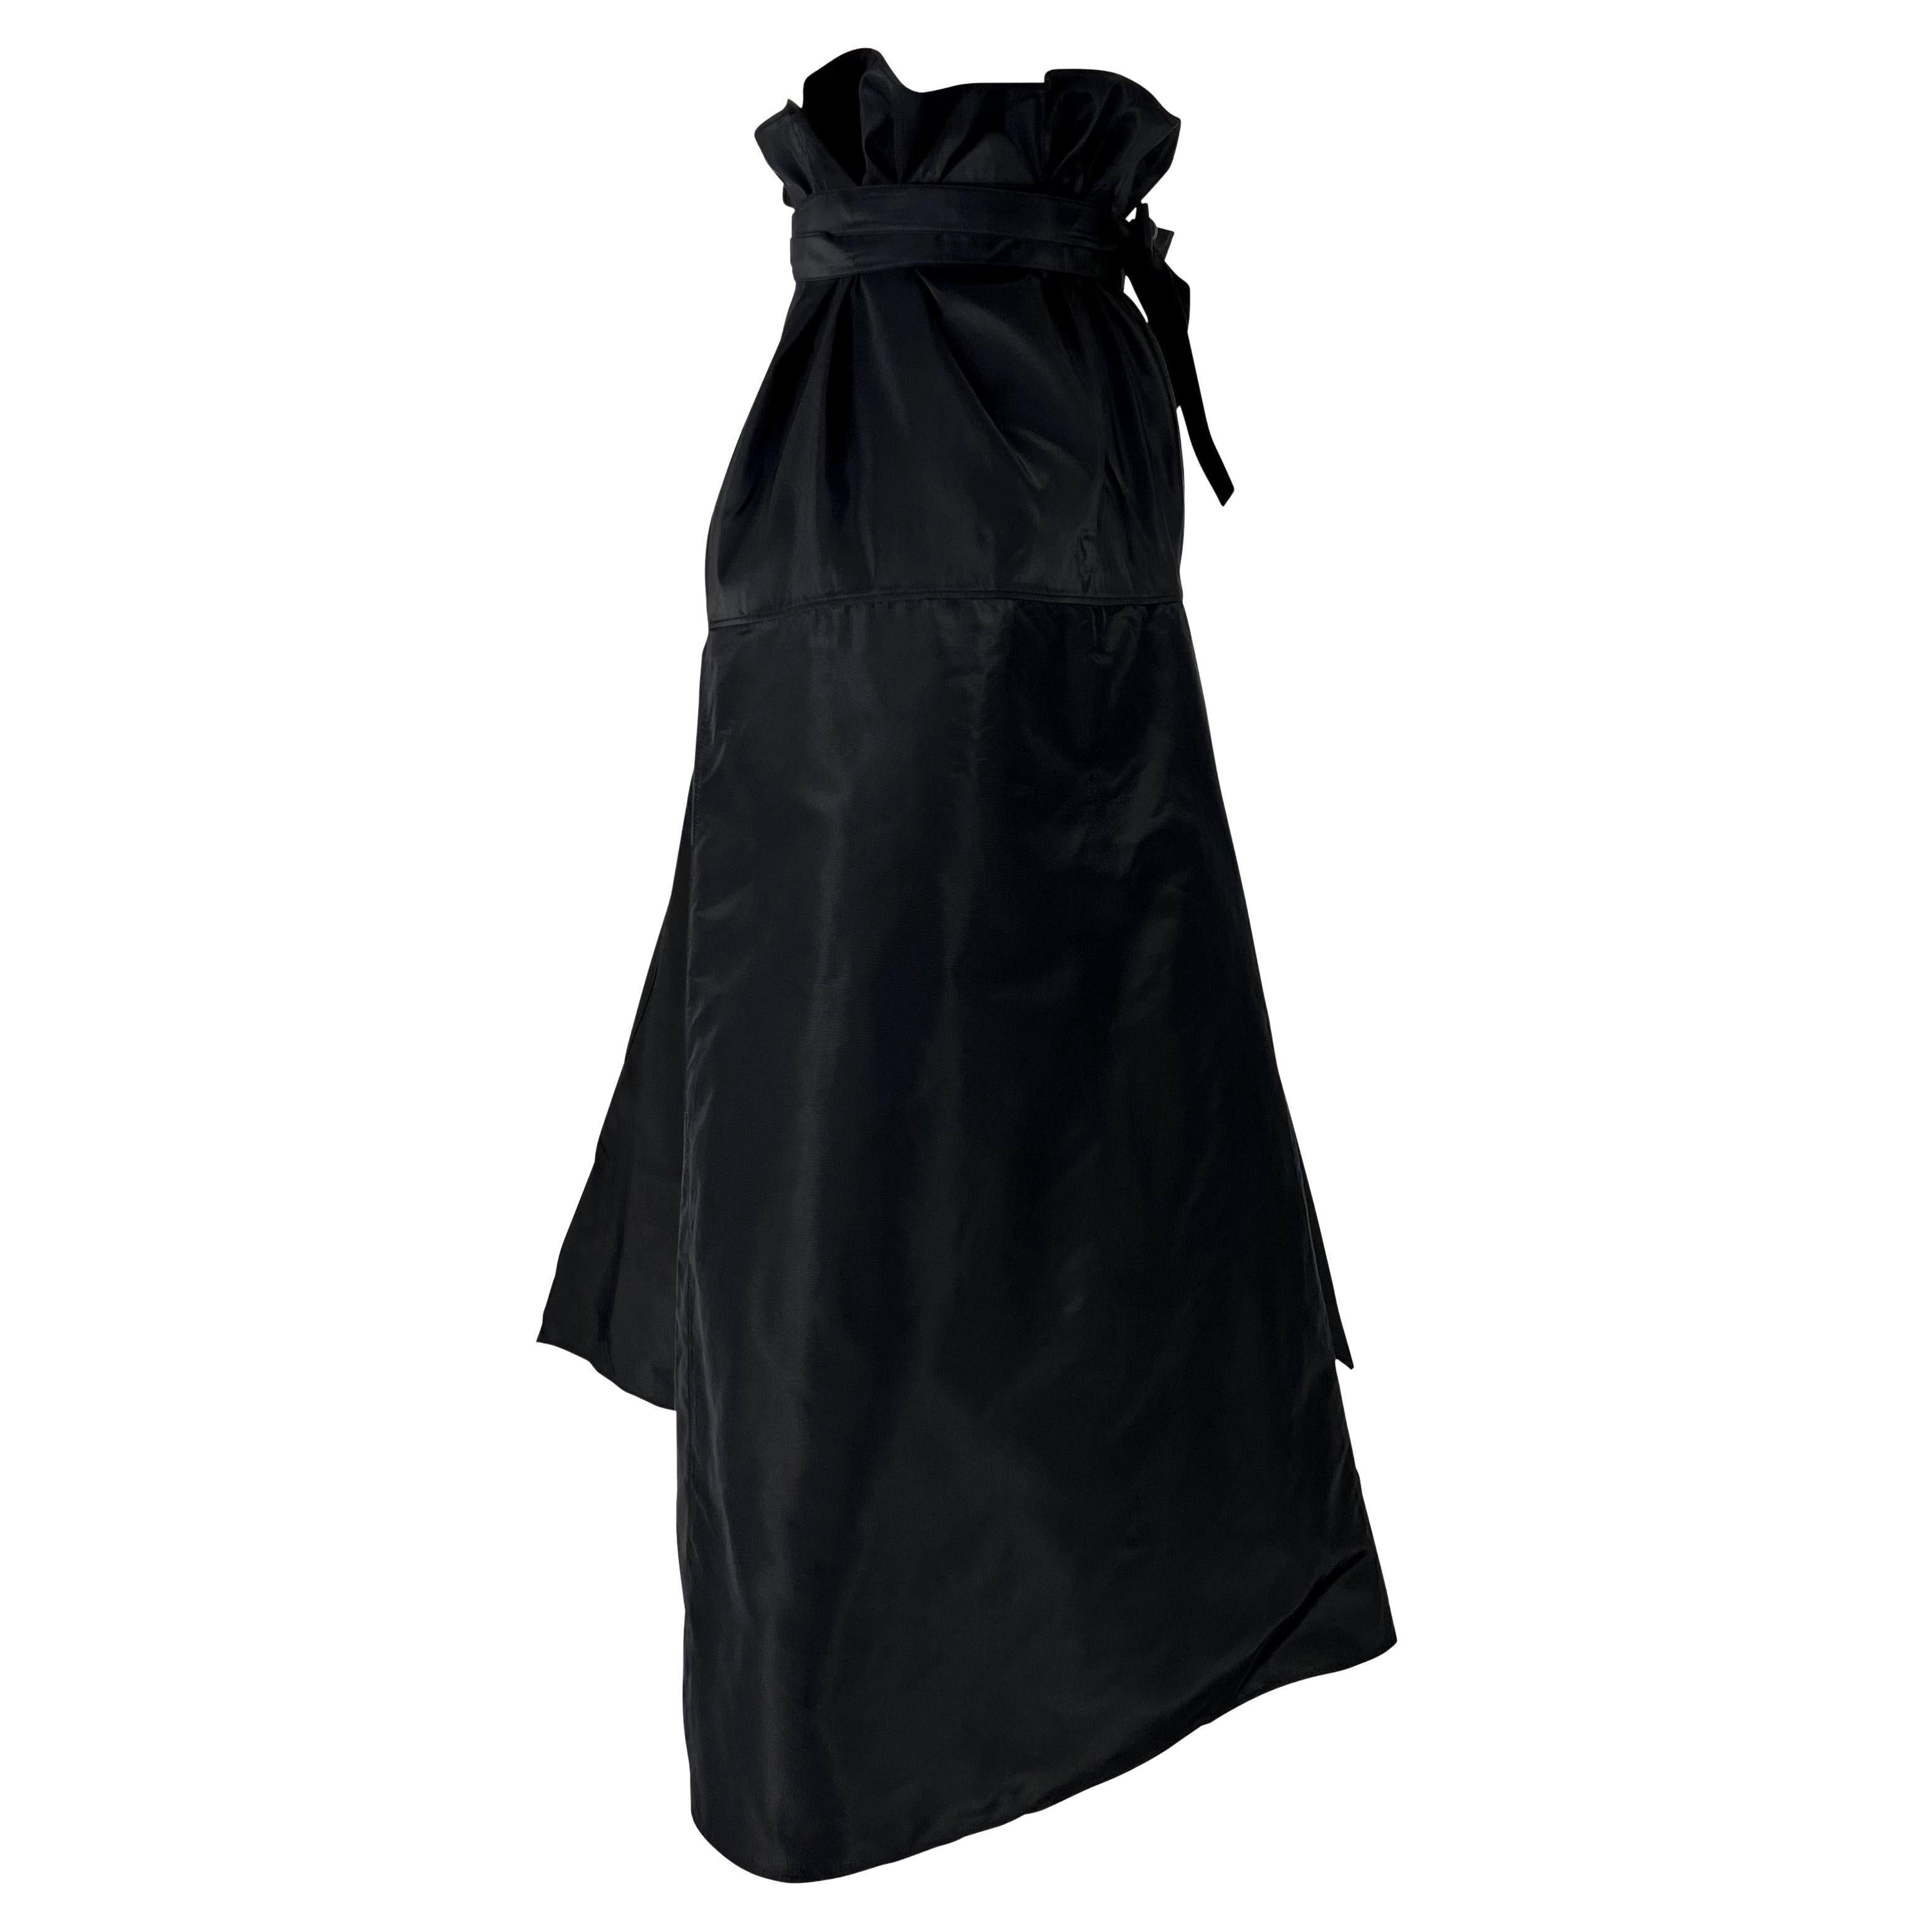 S/S 2002 Gucci by Tom Ford Runway Black Silk Taffeta Belted Wrap Oversized Skirt For Sale 4